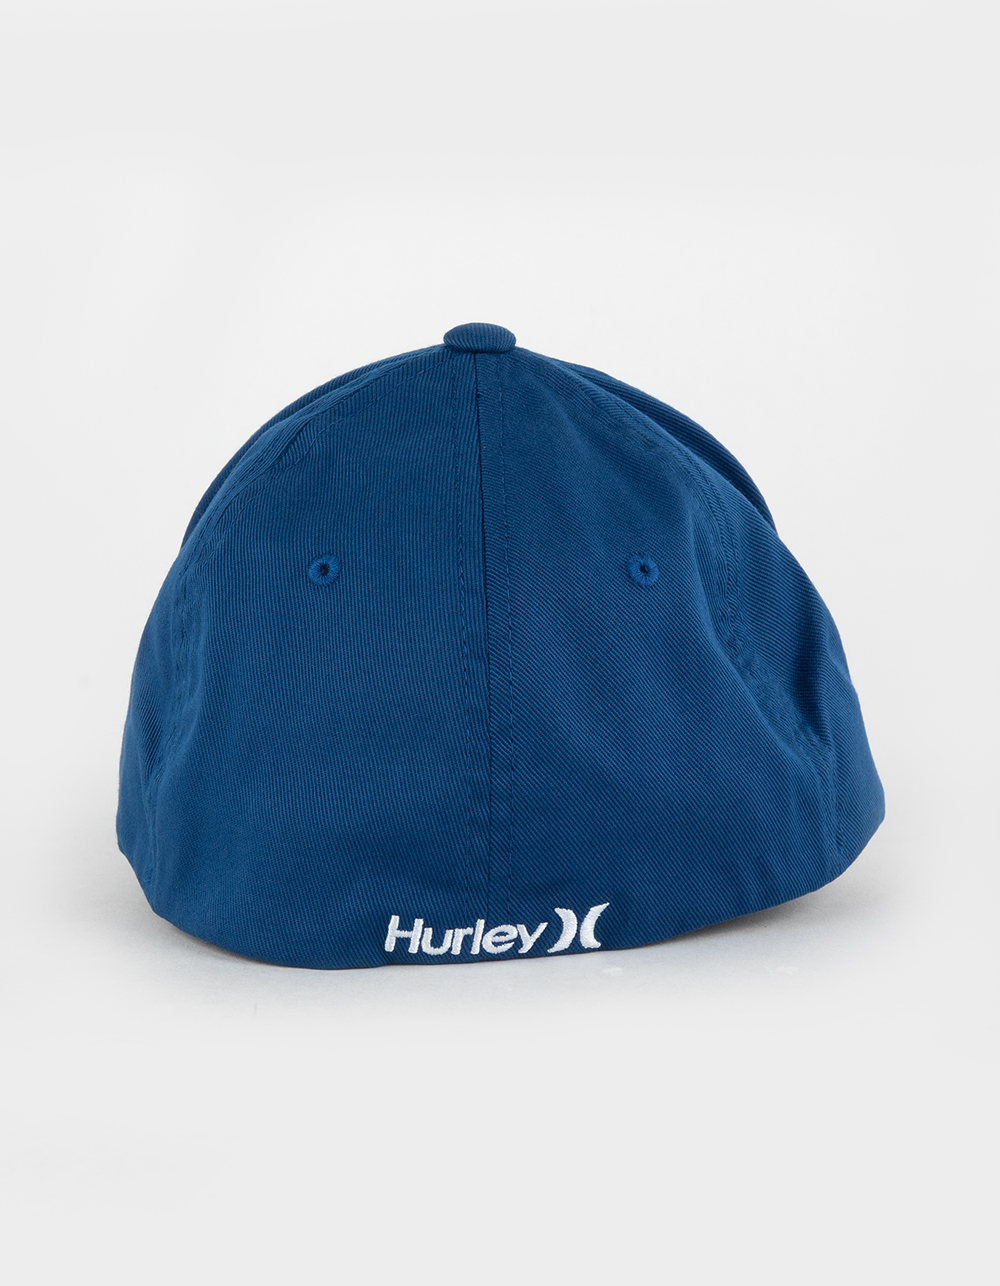 Hurley Men's One and Only Hat - Blue